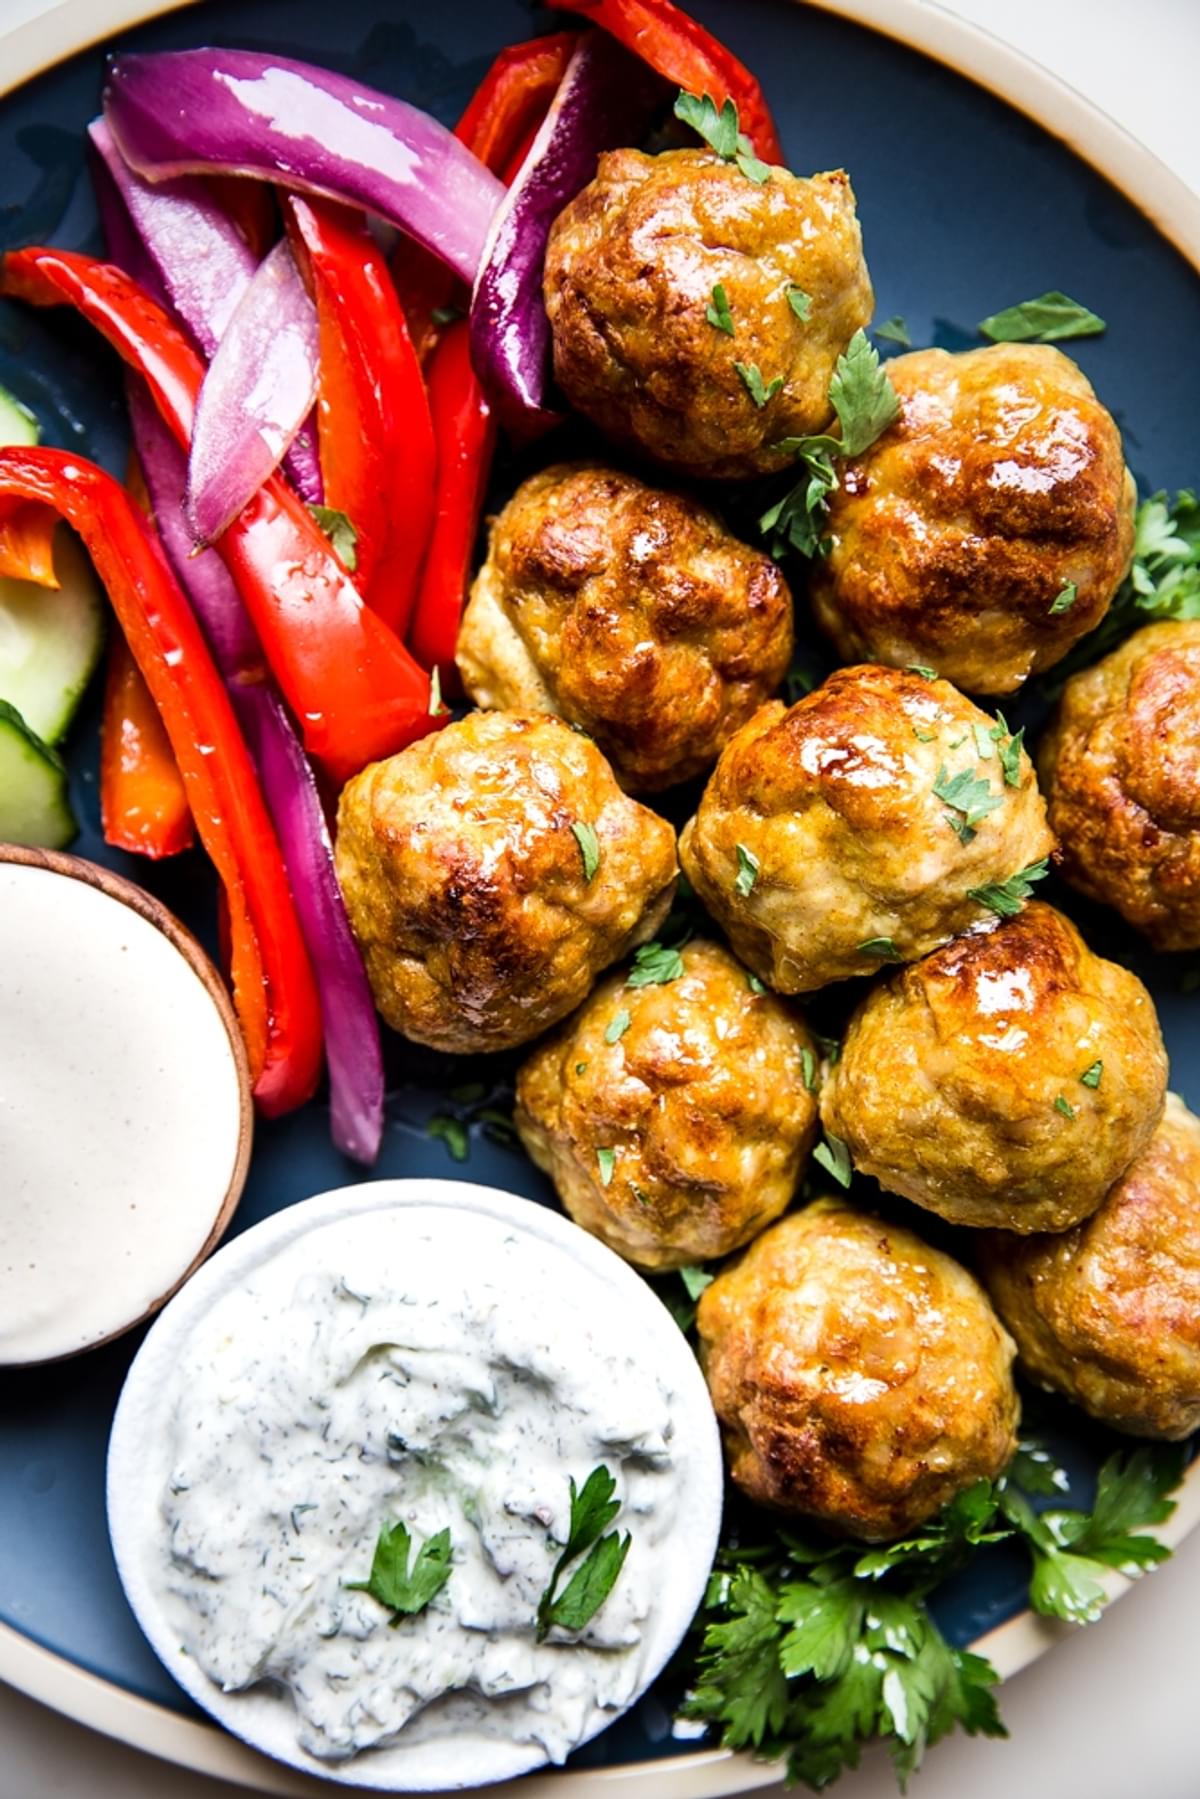 chicken shawarma meatballs shown on a blue plate with herbs and vegetables